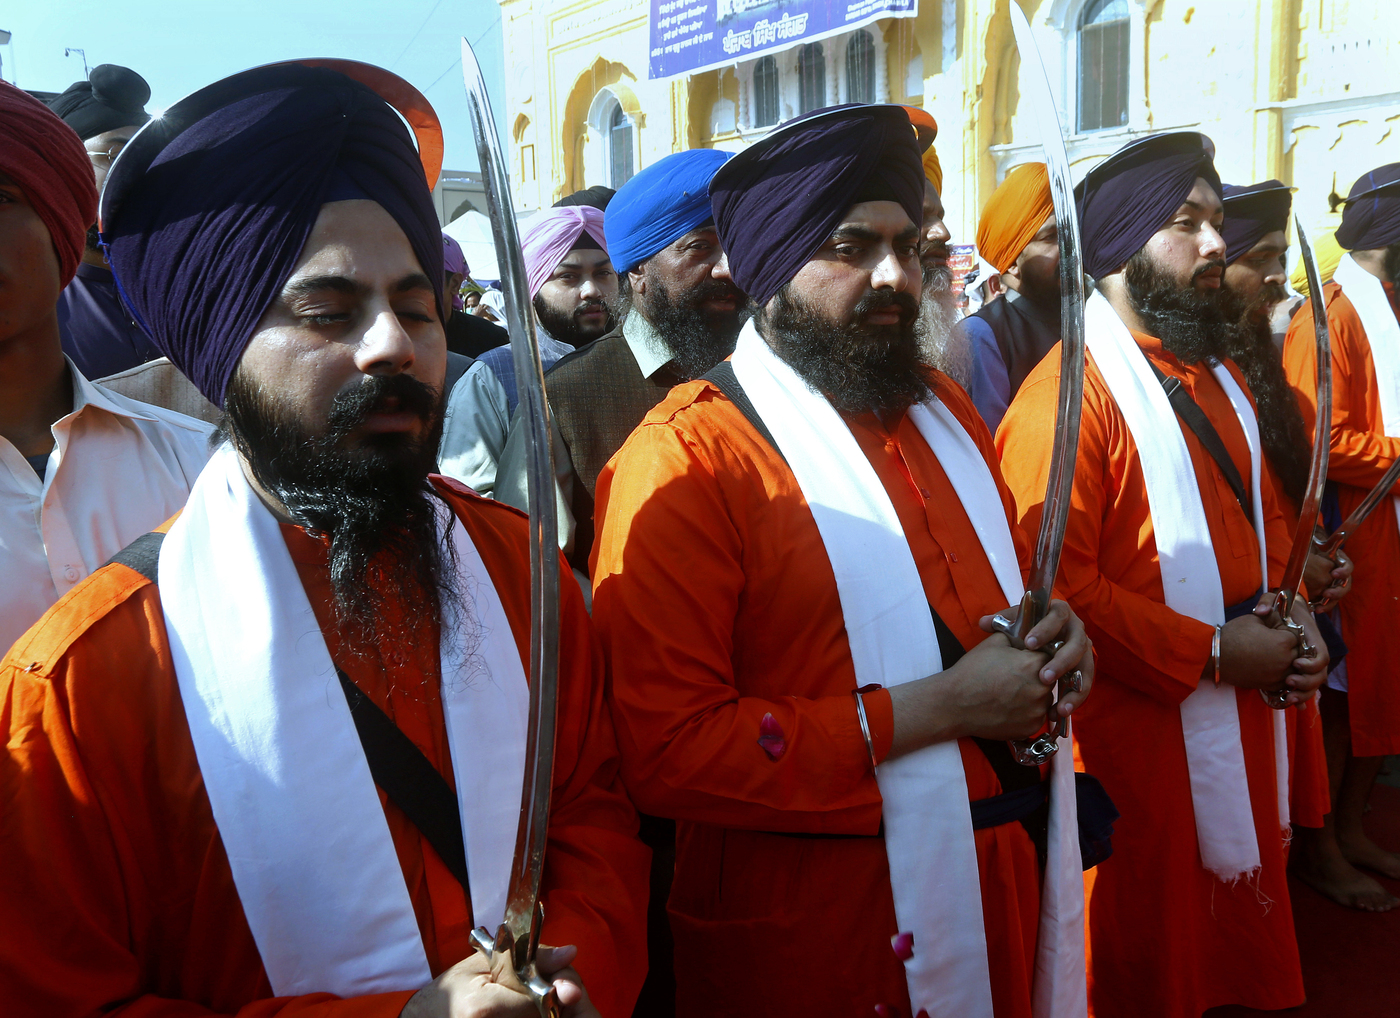 Sikh pilgrims in traditional dress hold ceremonial swords during a religious festival to celebrate the birth anniversary of their spiritual leader Baba Guru Nanak Dev, at Nankana Sahib, near Lahore, Pakistan, Monday, Nov. 30, 2020. Thousands of pilgrims from various countries arrived in Pakistan to participate in three-day festival to celebrate the 551st birth anniversary of the founder of the Sikh religion. (AP Photo/K.M. Chaudary)